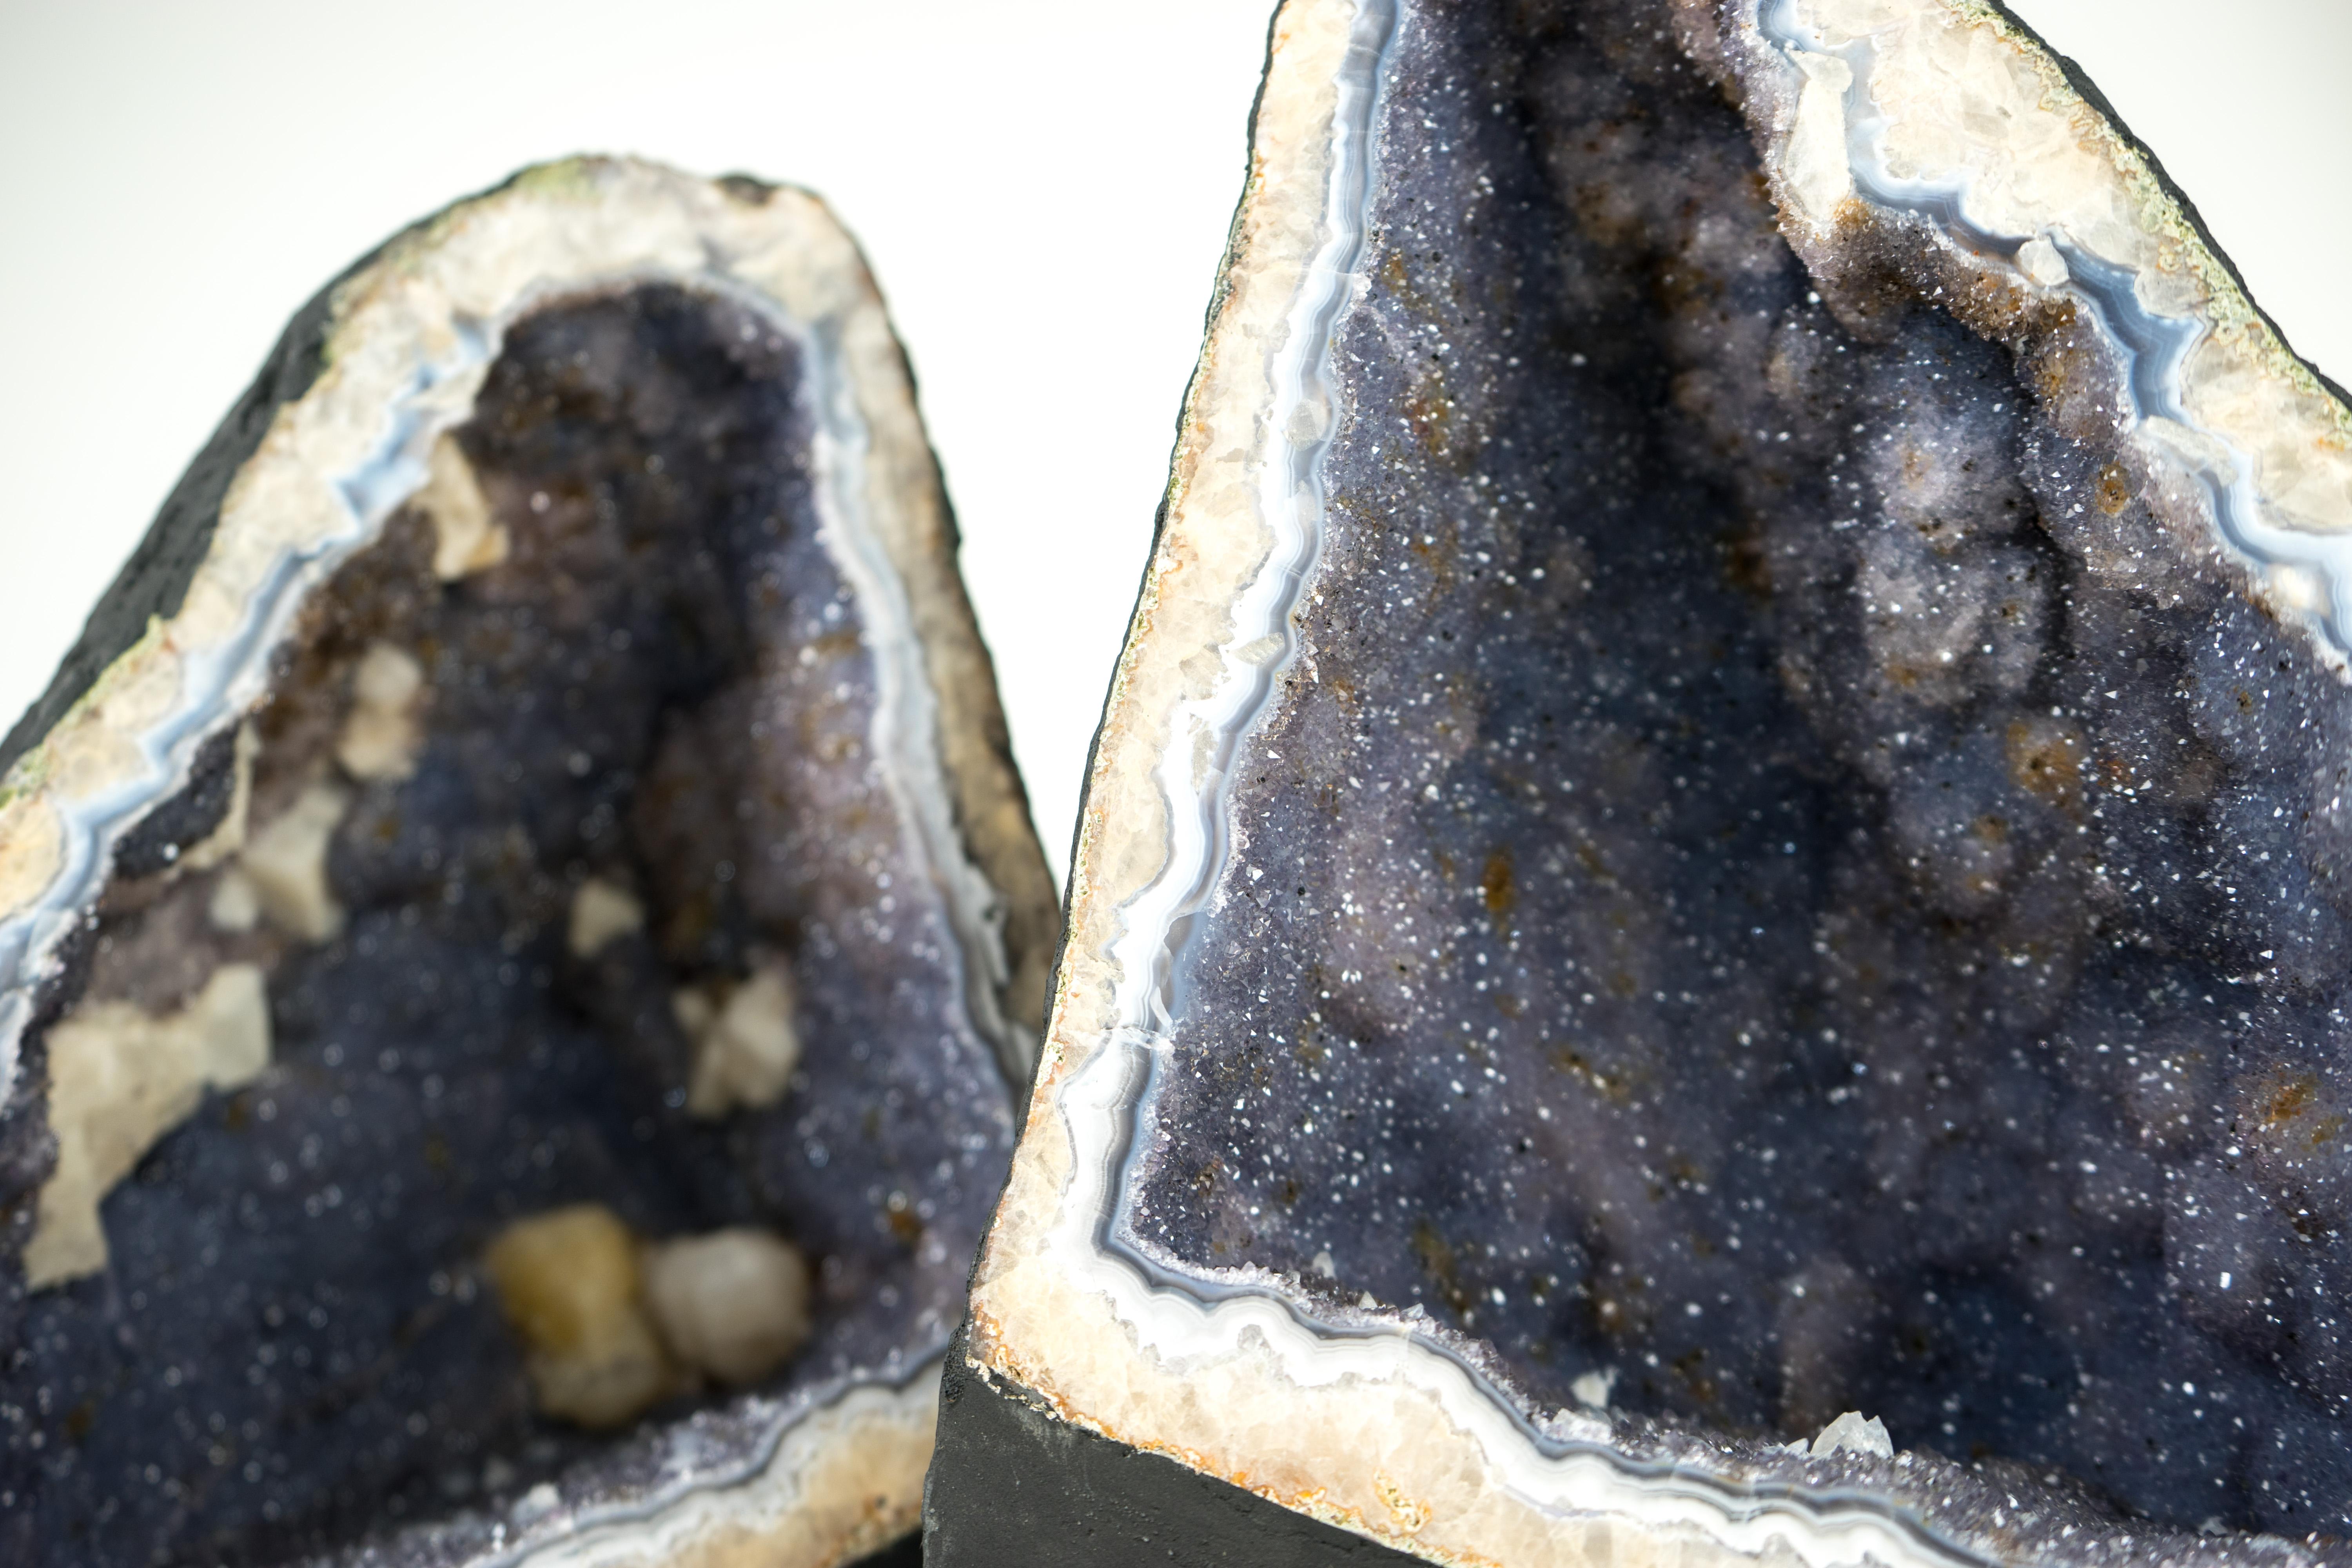 Rare Agate Amethyst Geodes, with Lavender Galaxy Amethyst Druzy and Calcite

▫️ Description

A pair of natural Agate Geodes, each with rare characteristics, form truly natural artworks. Blue and white agate bandings, lavender galaxy druzy, and the